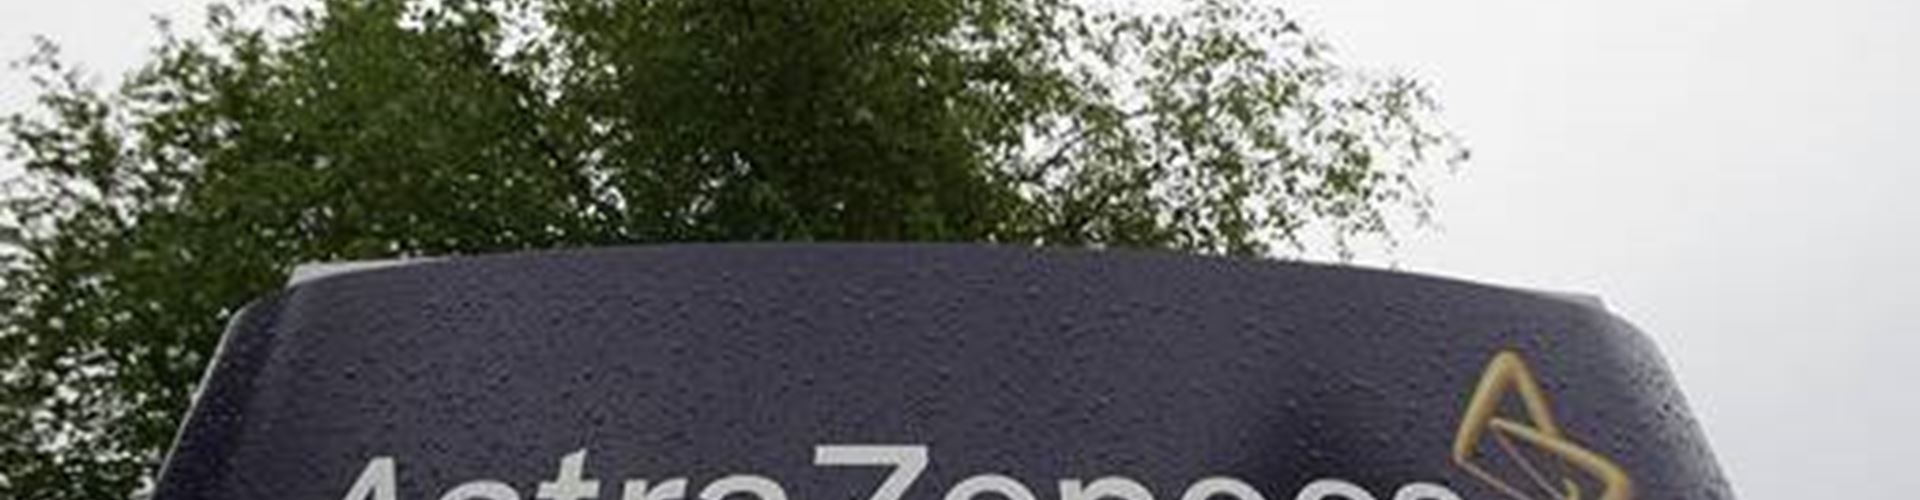 Why is Pfizer still pursuing AstraZeneca acquisition?